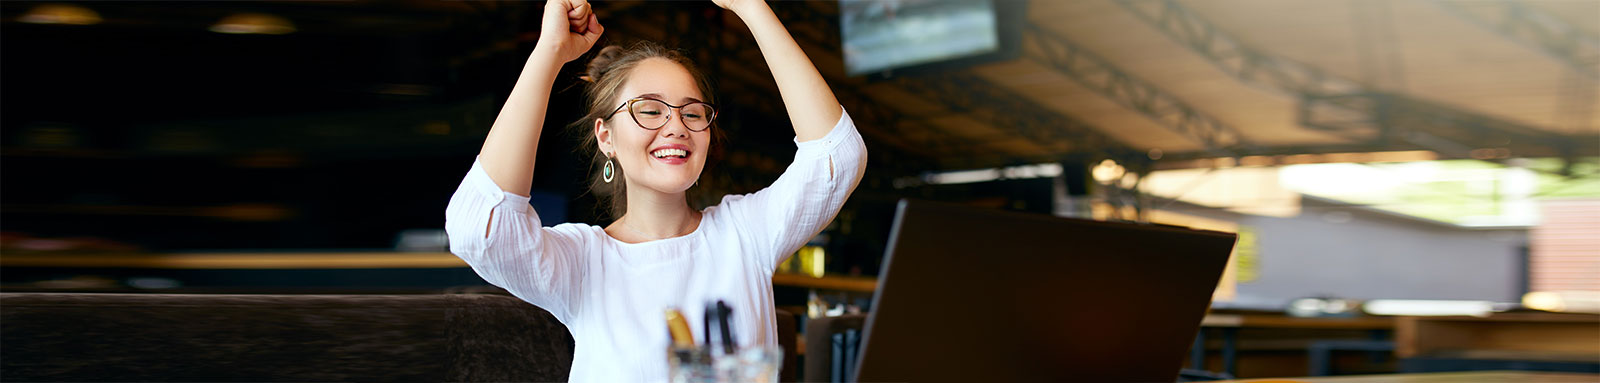 Happy woman celebrating success with arms raised up in front of laptop